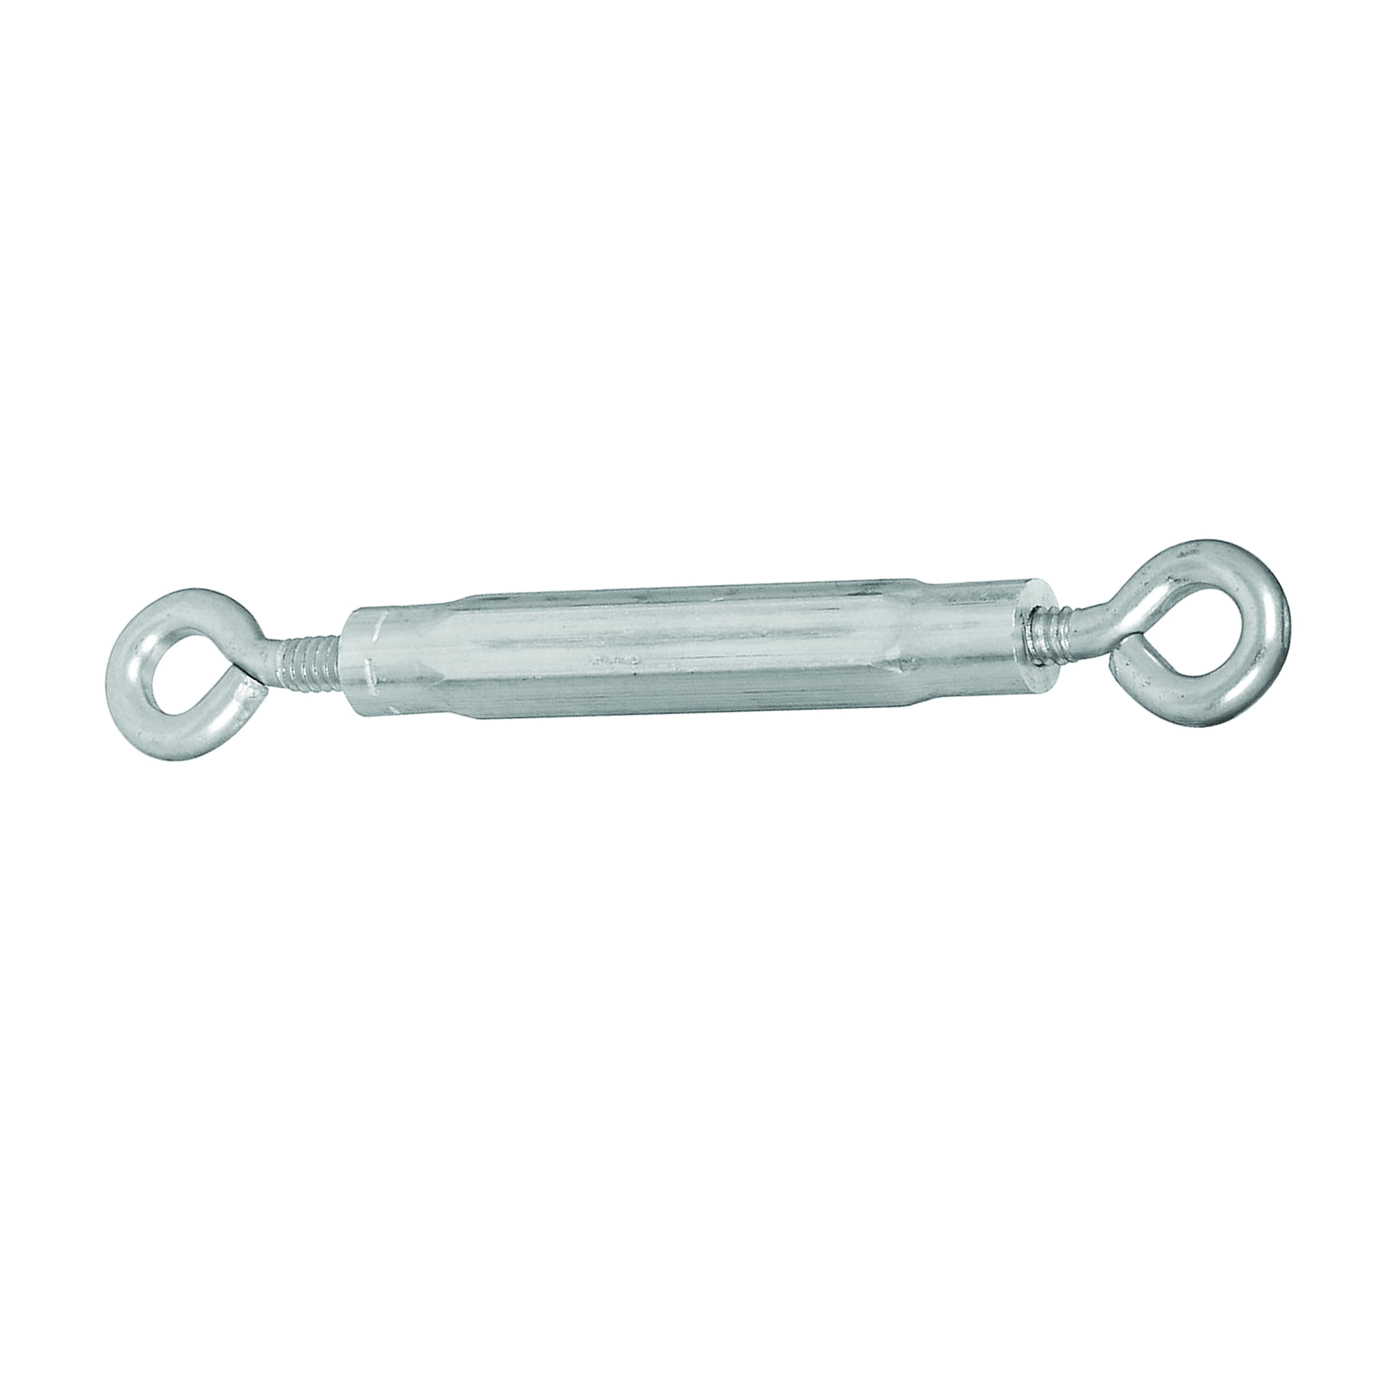 National Hardware 2170BC Series N221-770 Turnbuckle, 215 lb Working Load, 3/8-16 in Thread, Eye, Eye, 16 in L Take-Up - 1